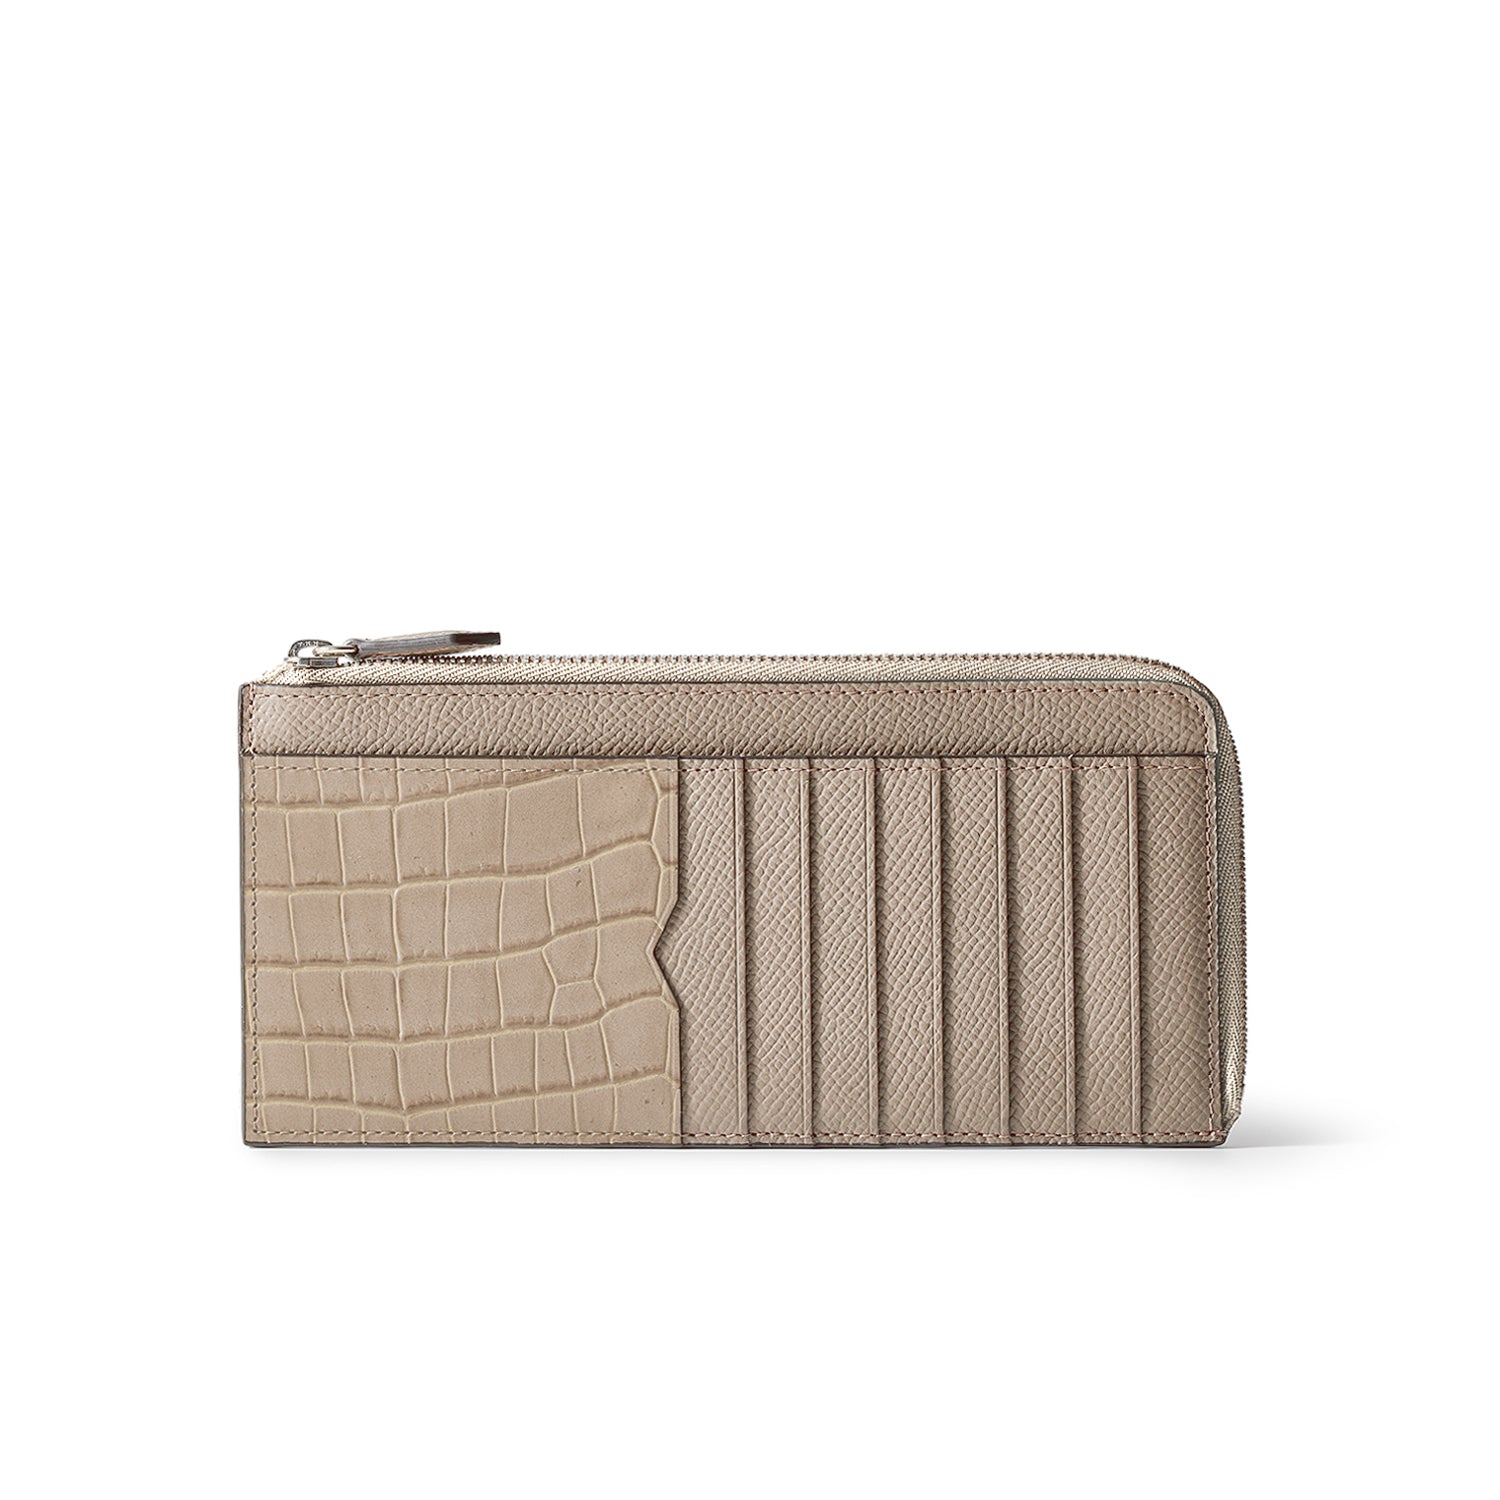 Long L-shaped zip wallet in Noblesse and embossed crocodile leather